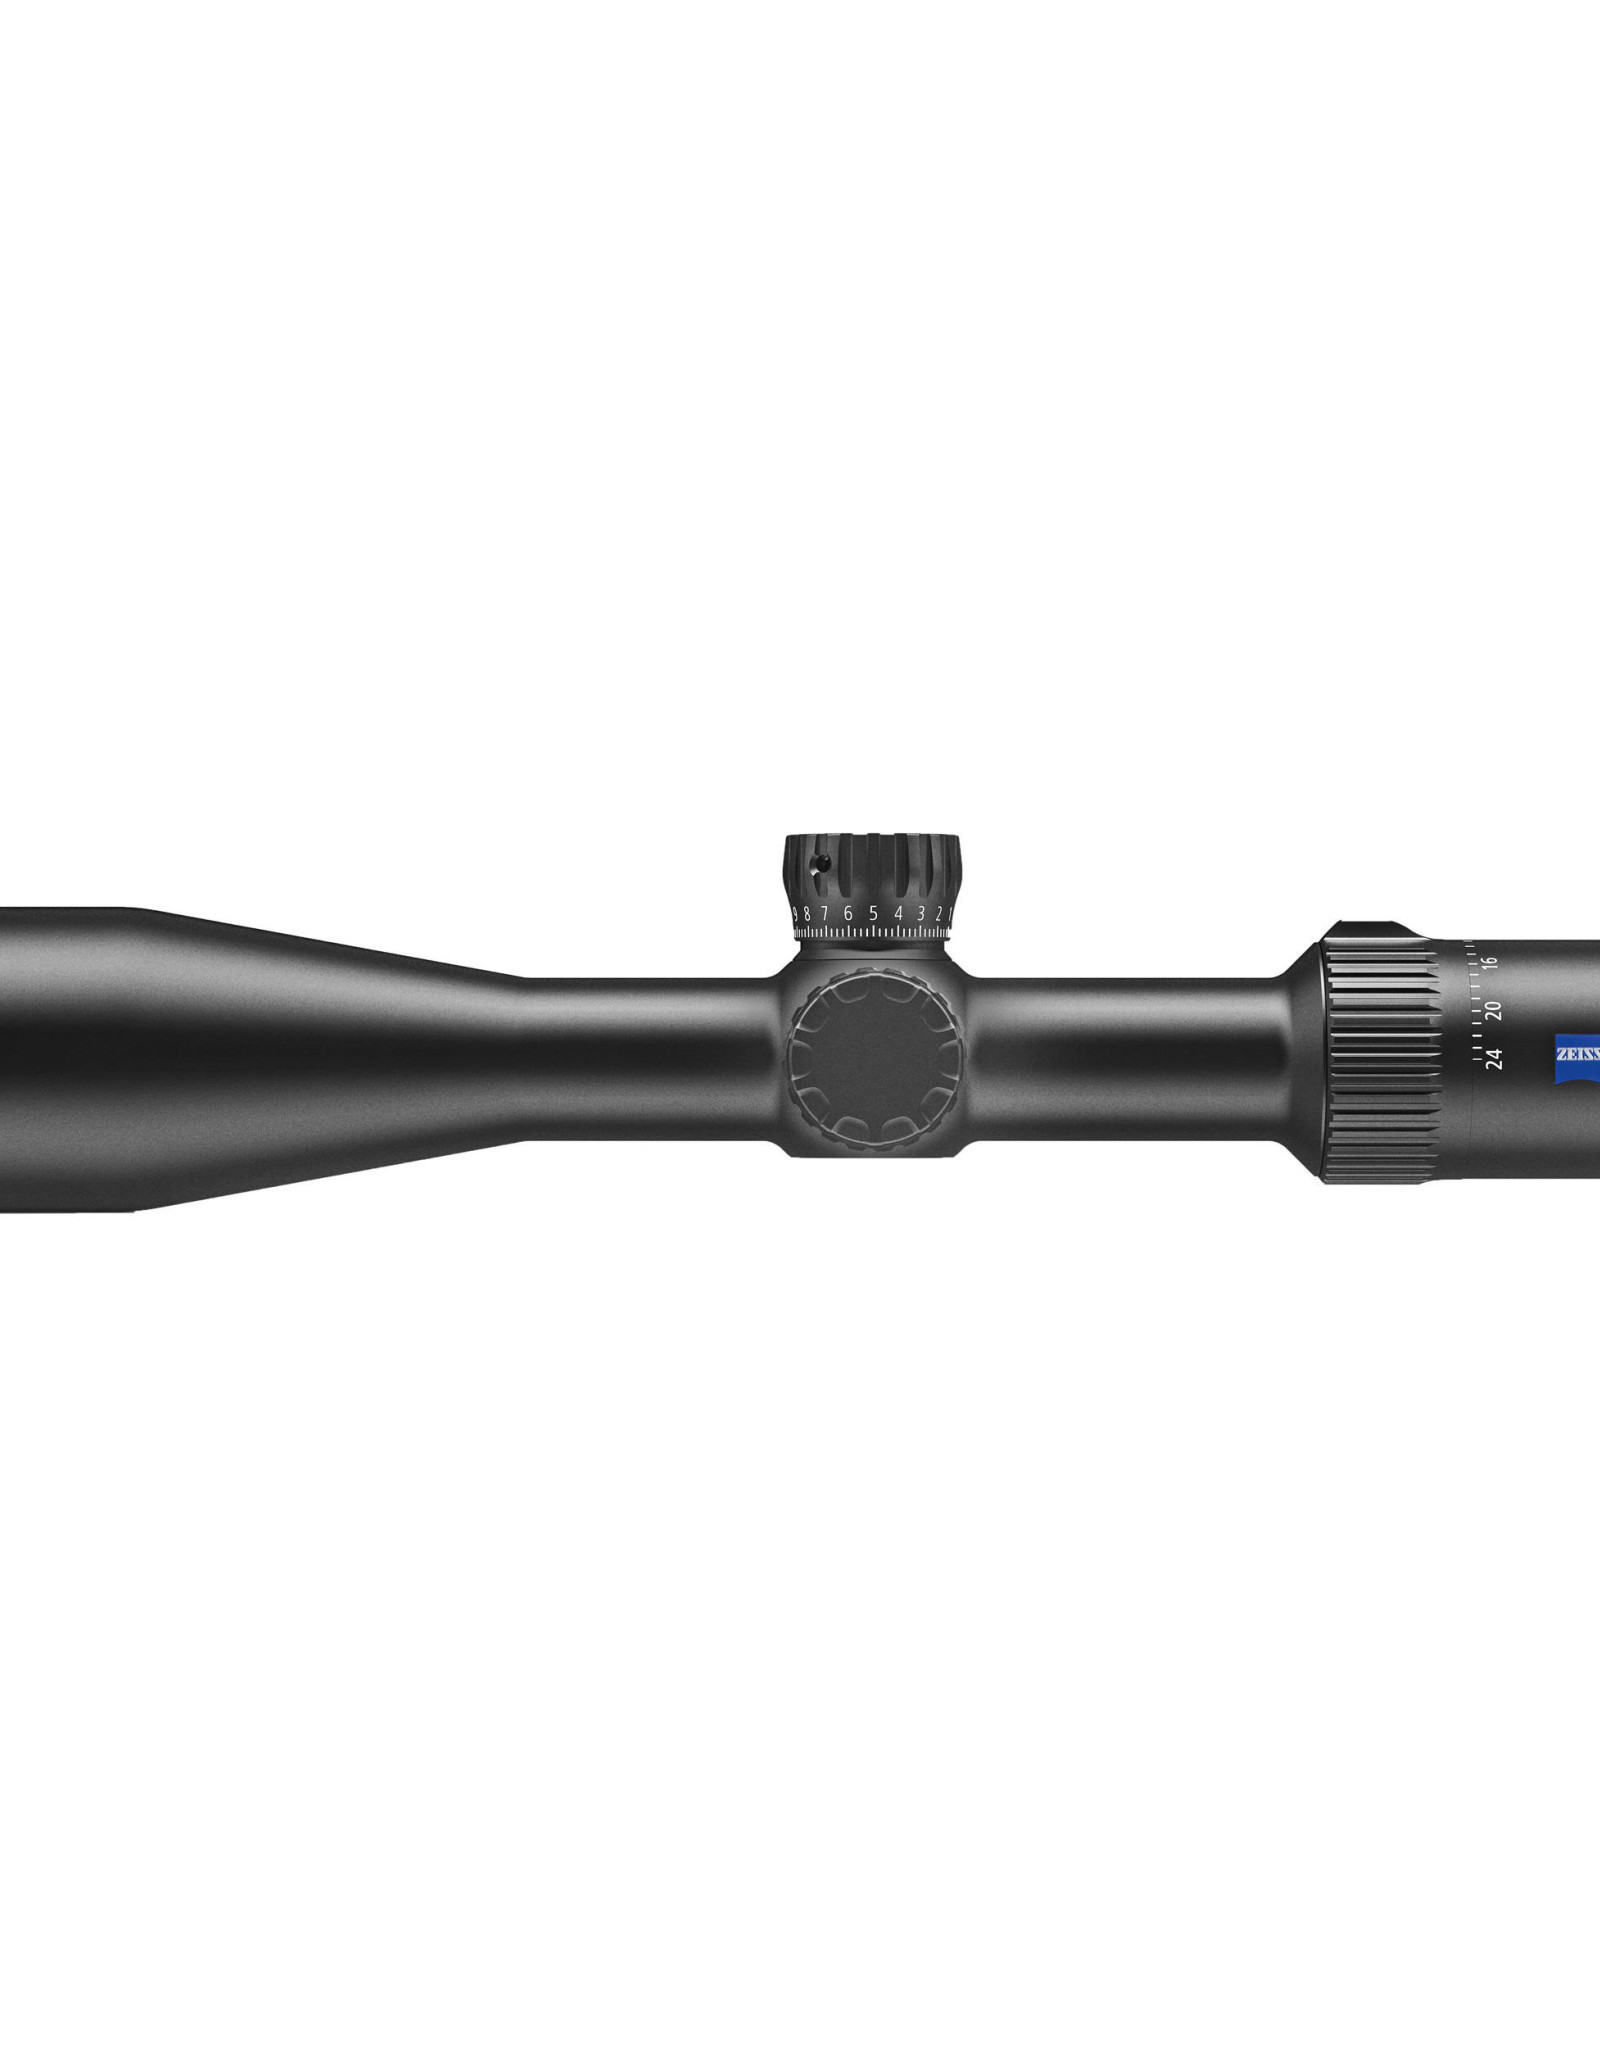 Zeiss Conquest V4 6-24x50 Reticle 60 Illuminated